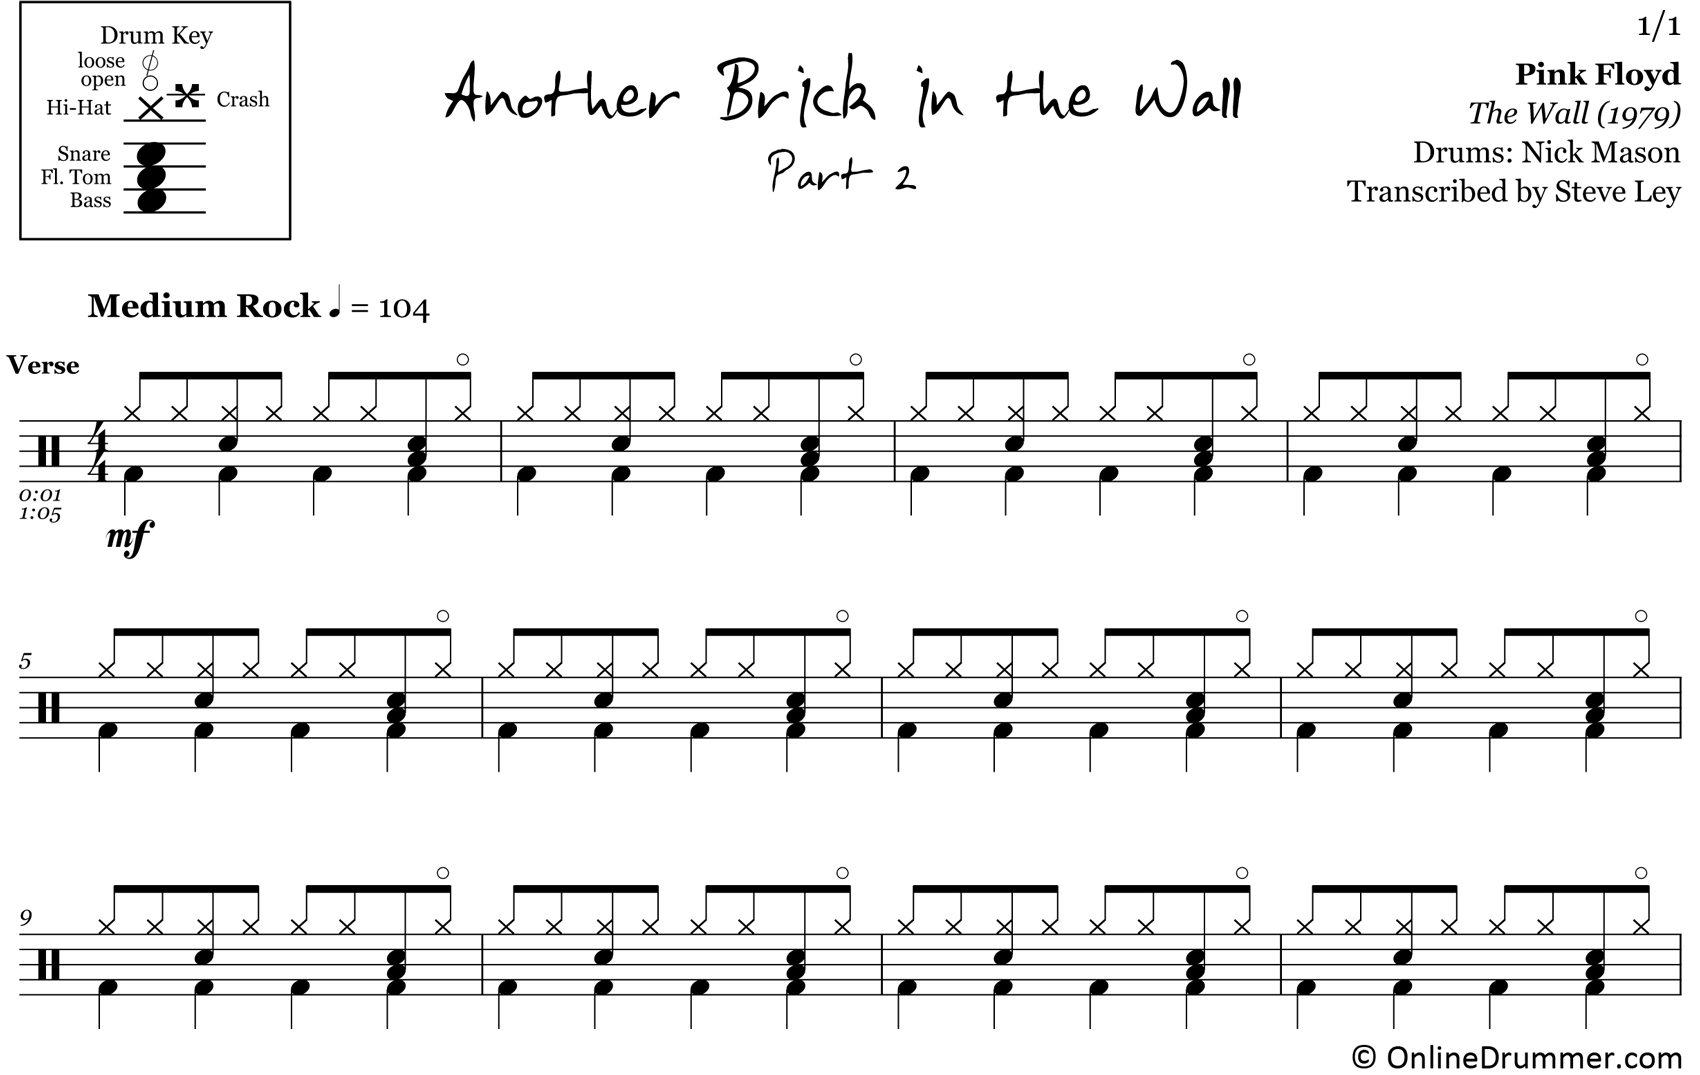 Another Brick In The Wall, Part 2 Sheet Music, Pink Floyd